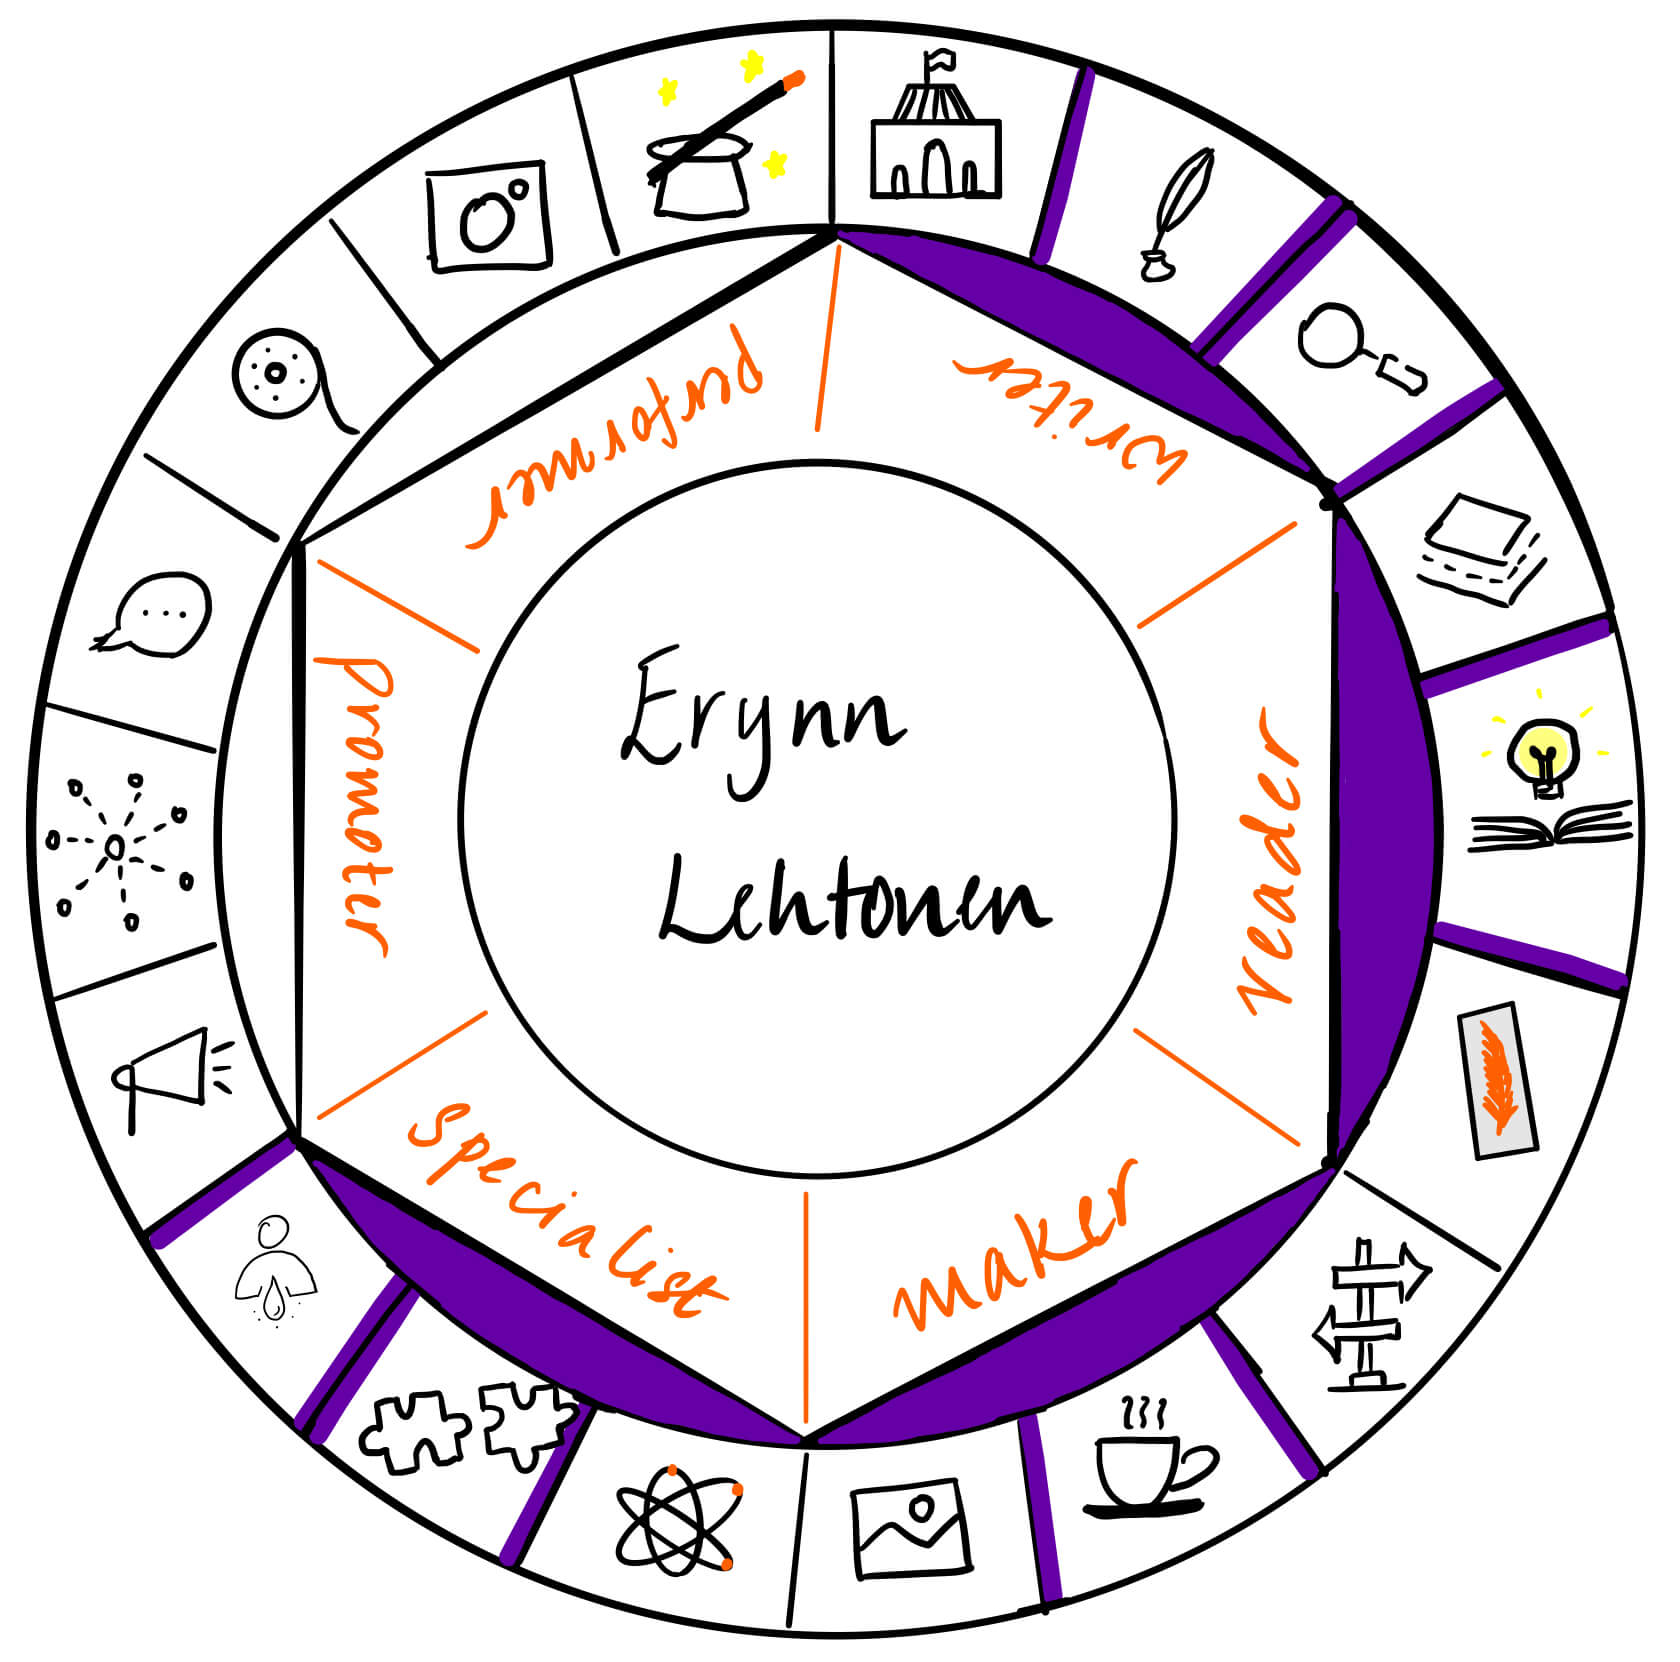 Erynn Lehtonen is a specialist, reader, maker and writer. She is  telling us about her experiences in ghost writing on Creator's Roulette today.